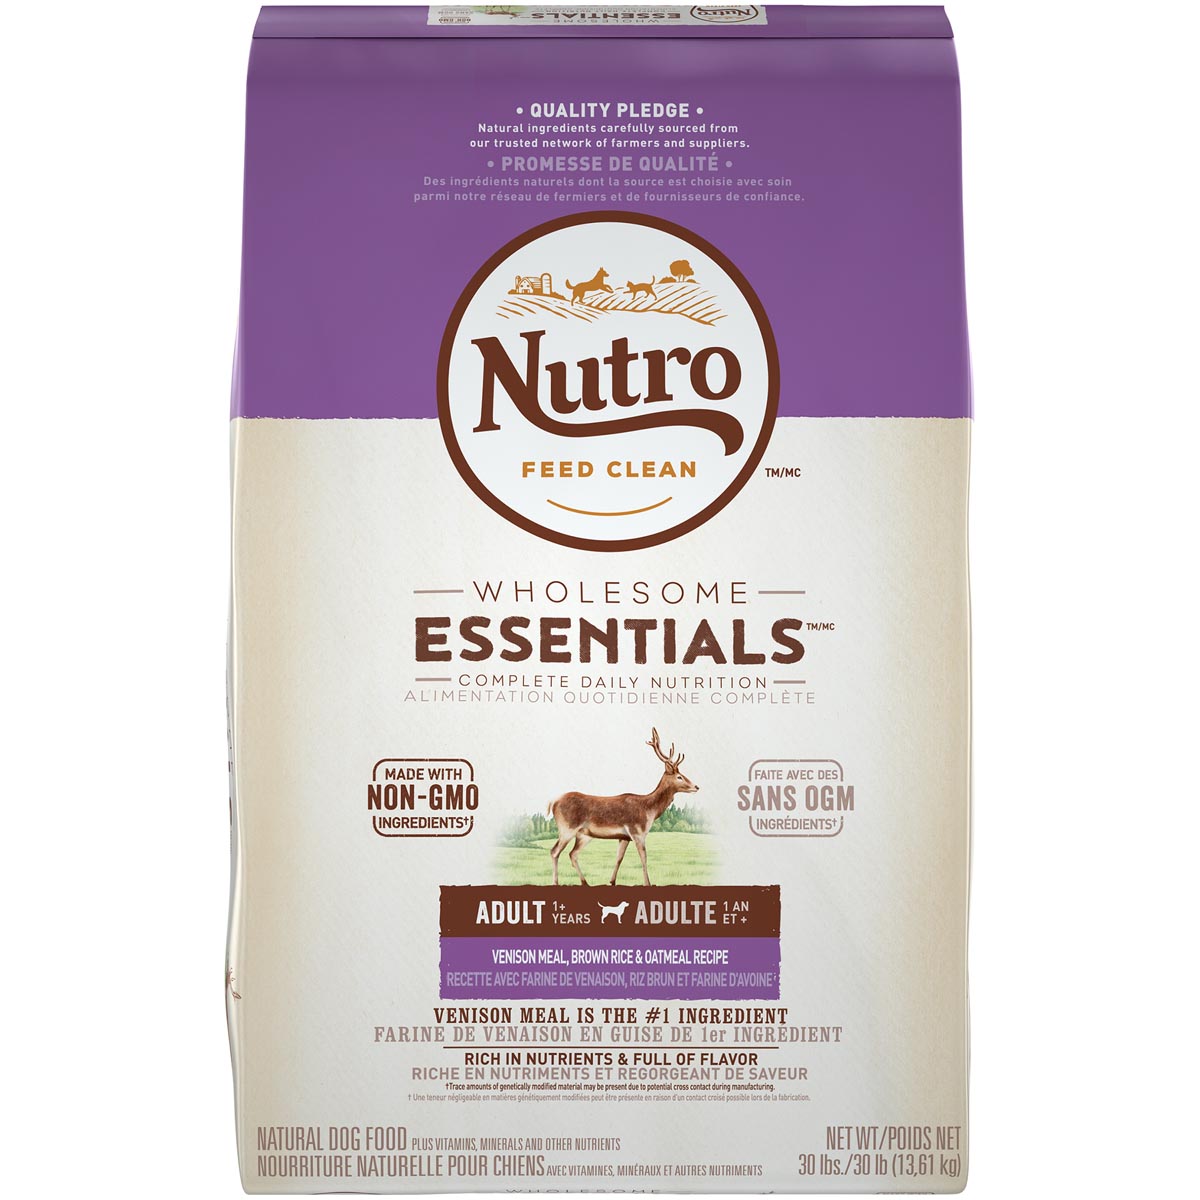 Nutro Wholesome Essentials Venison Meal, Brown Rice & Oatmeal Recipe Adult